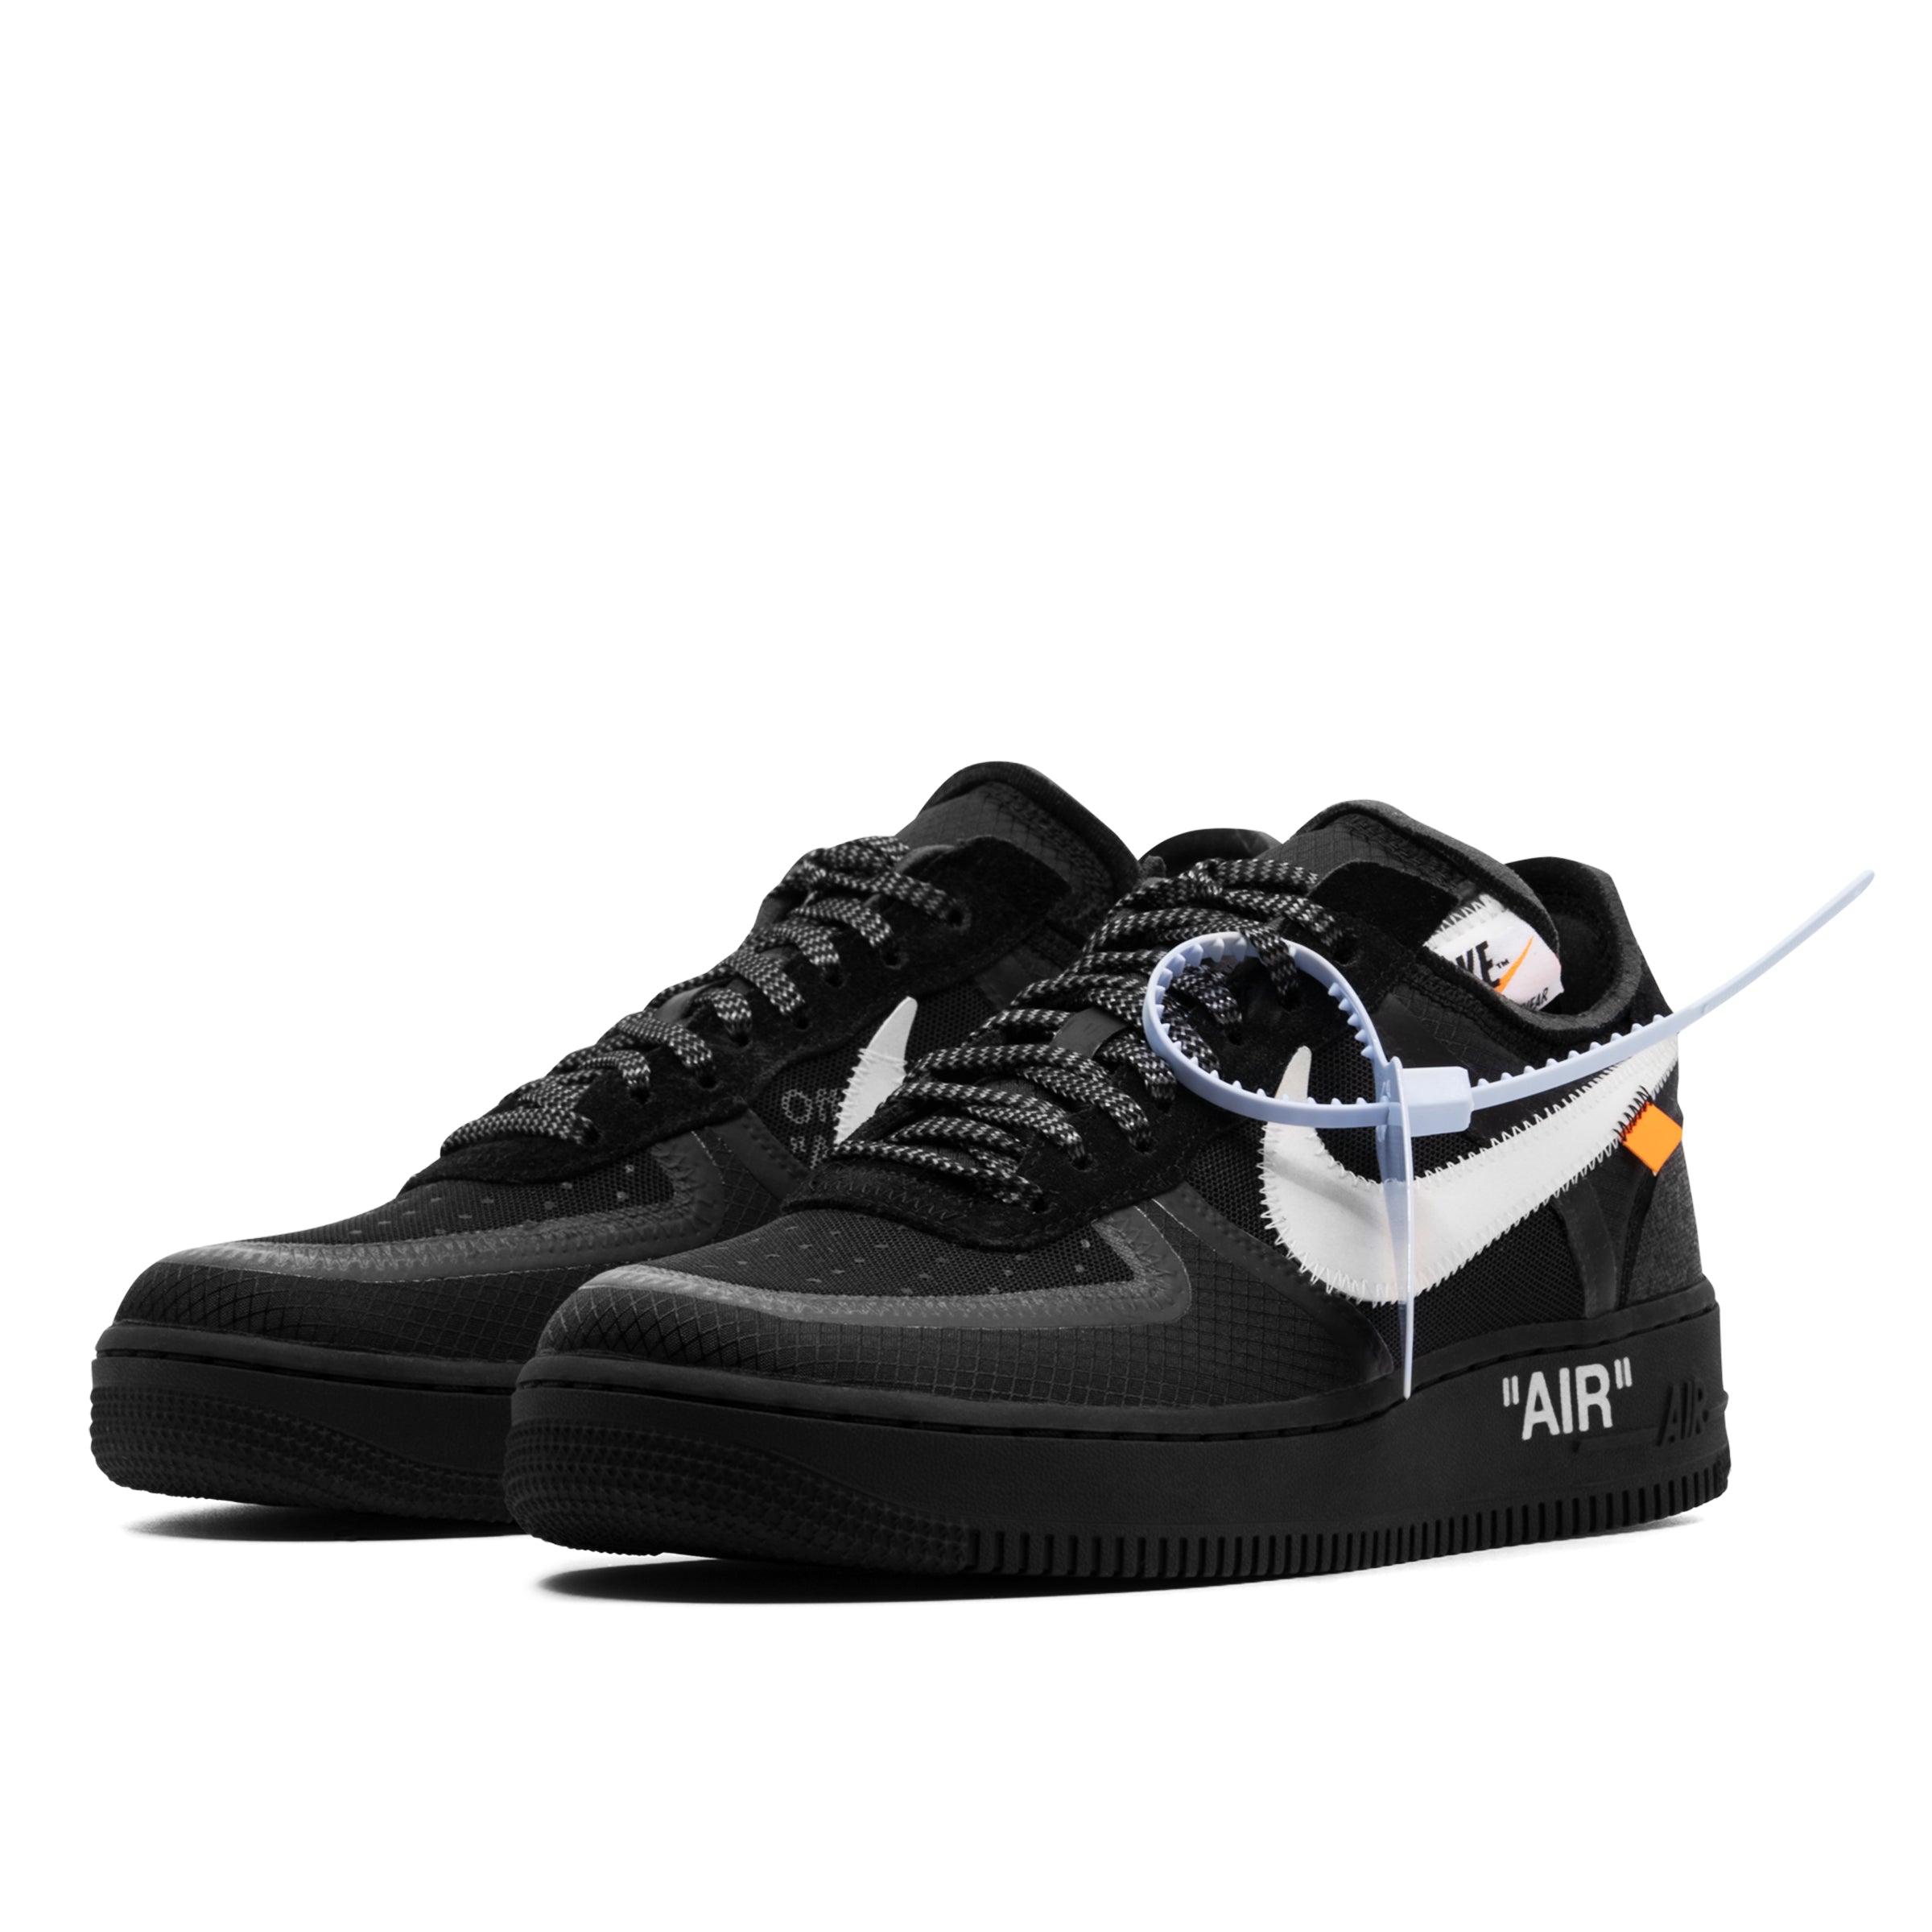 NIKE AIR FORCE 1 LOW OFF-WHITE BLACK